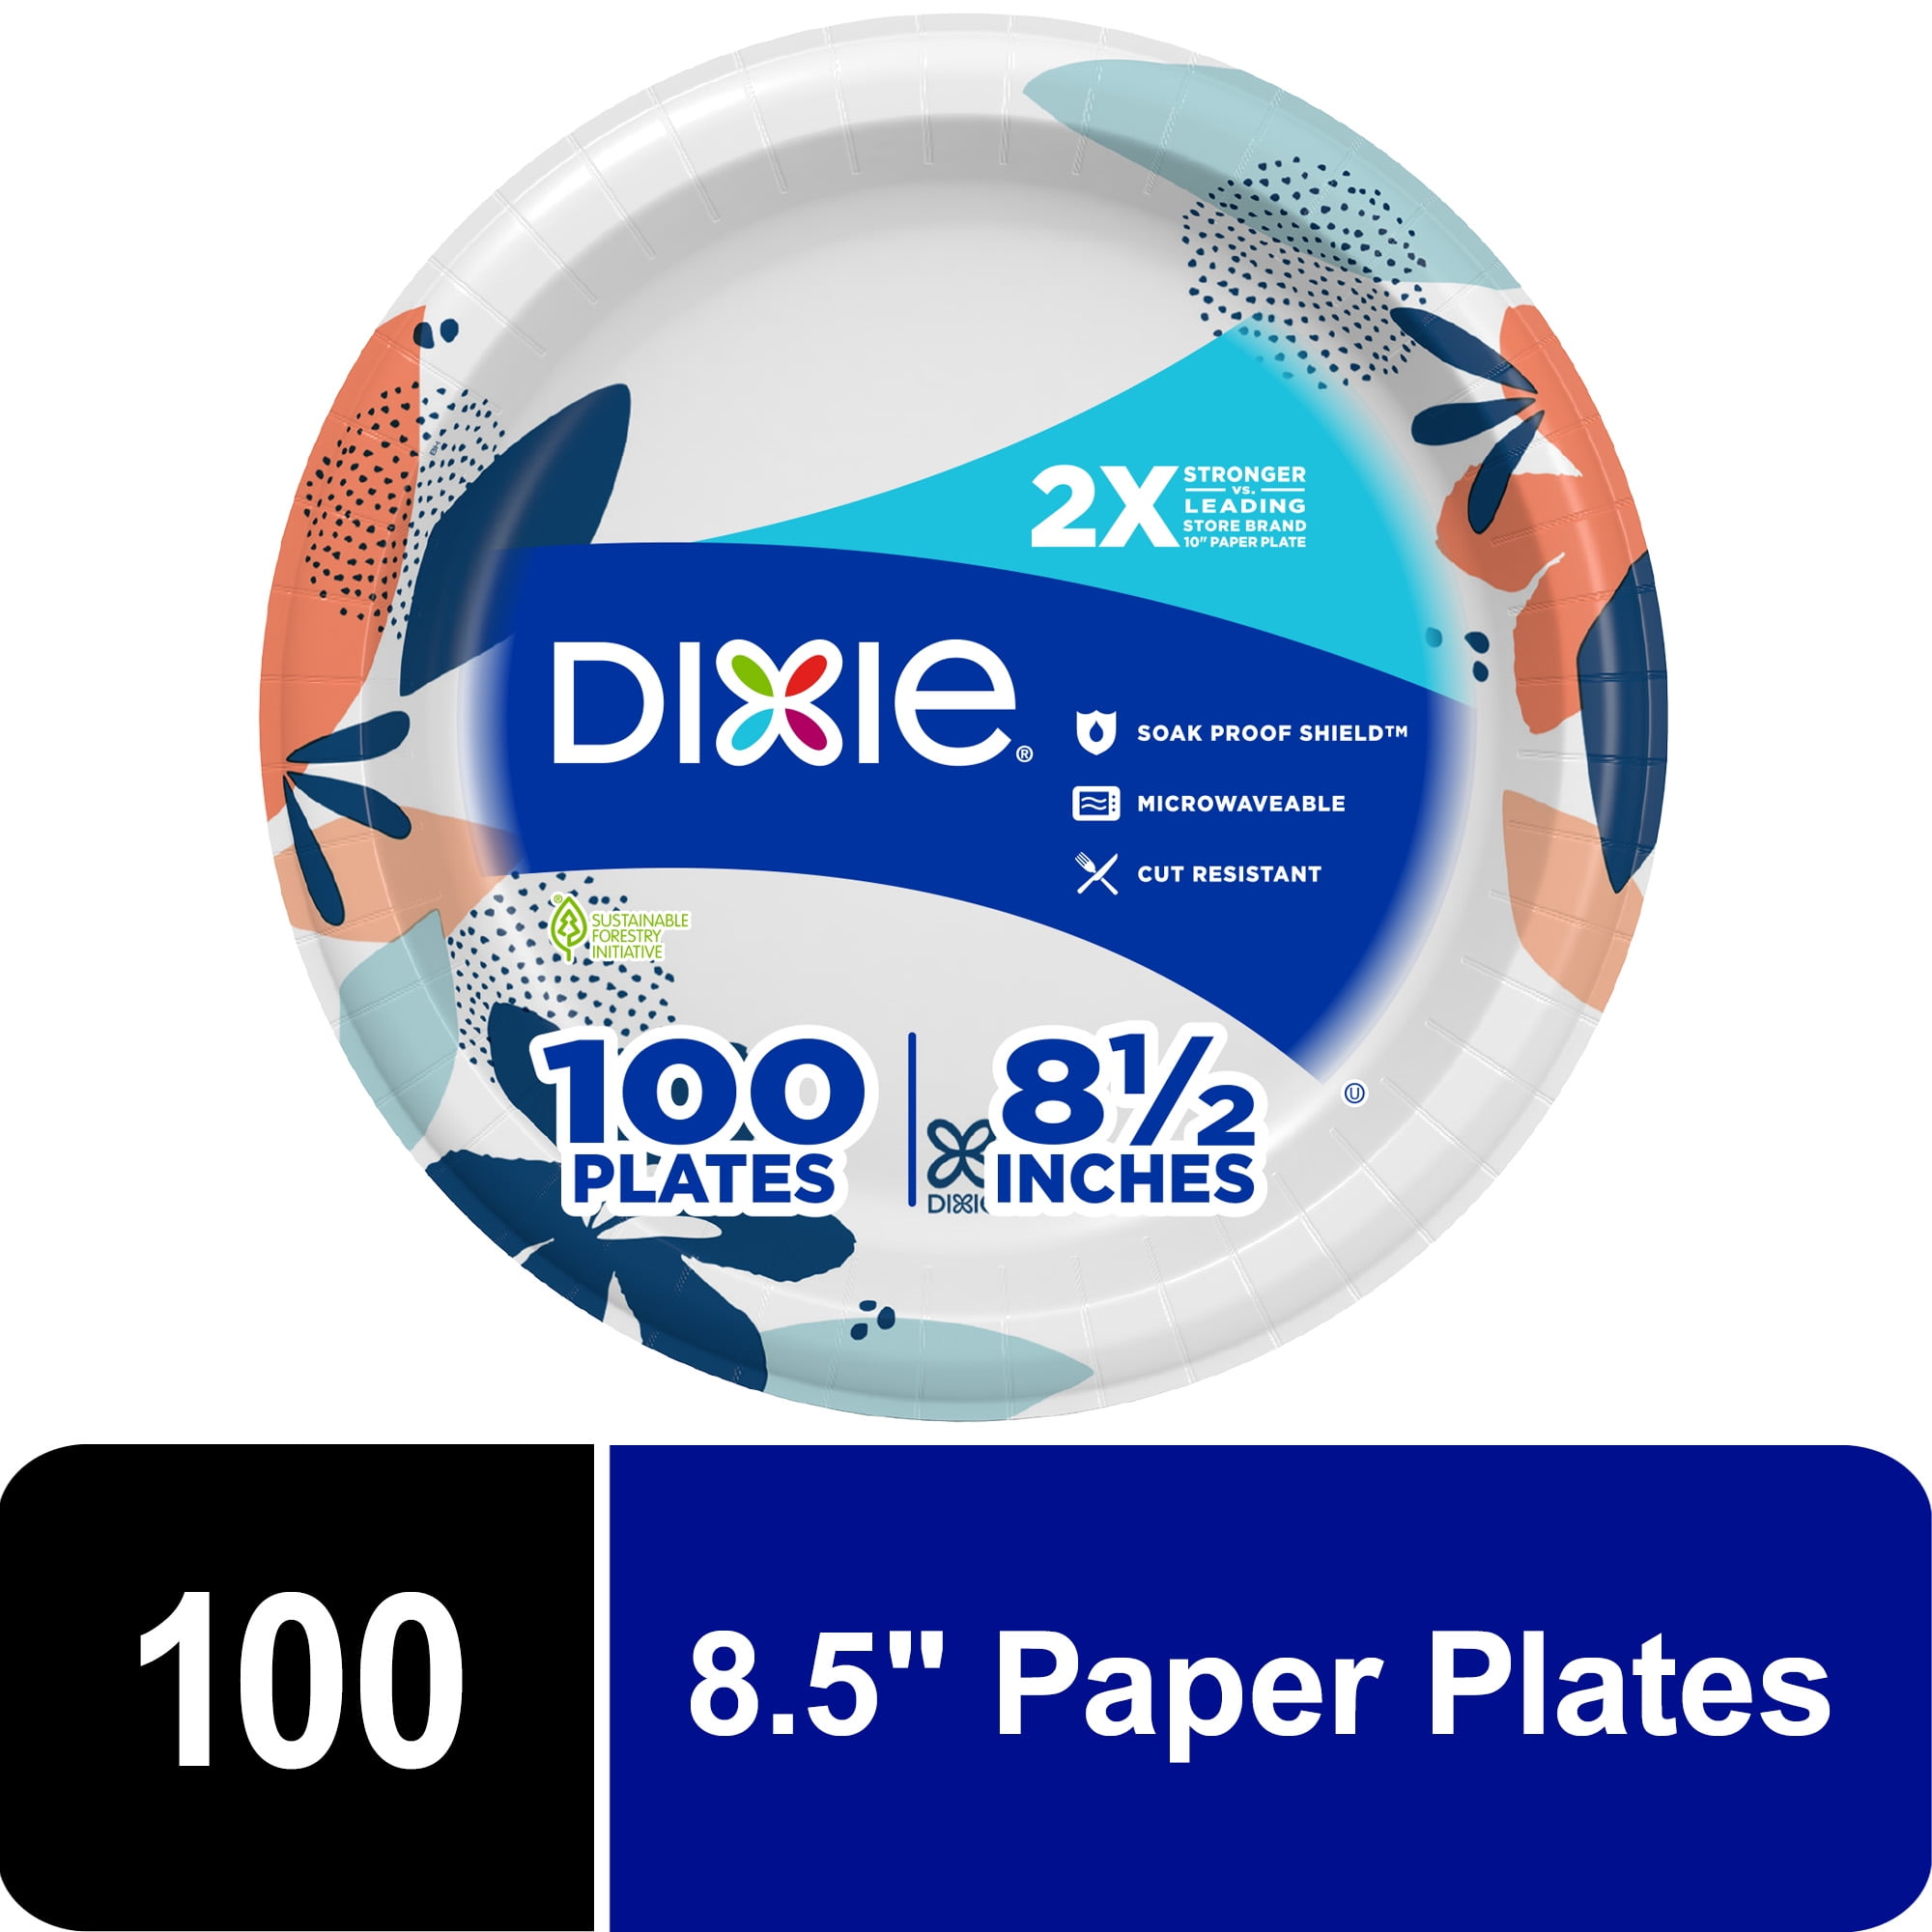 Solo 6 7/8 Heavy Duty Paper Plates, 48-Count Packages (Pack of 12)